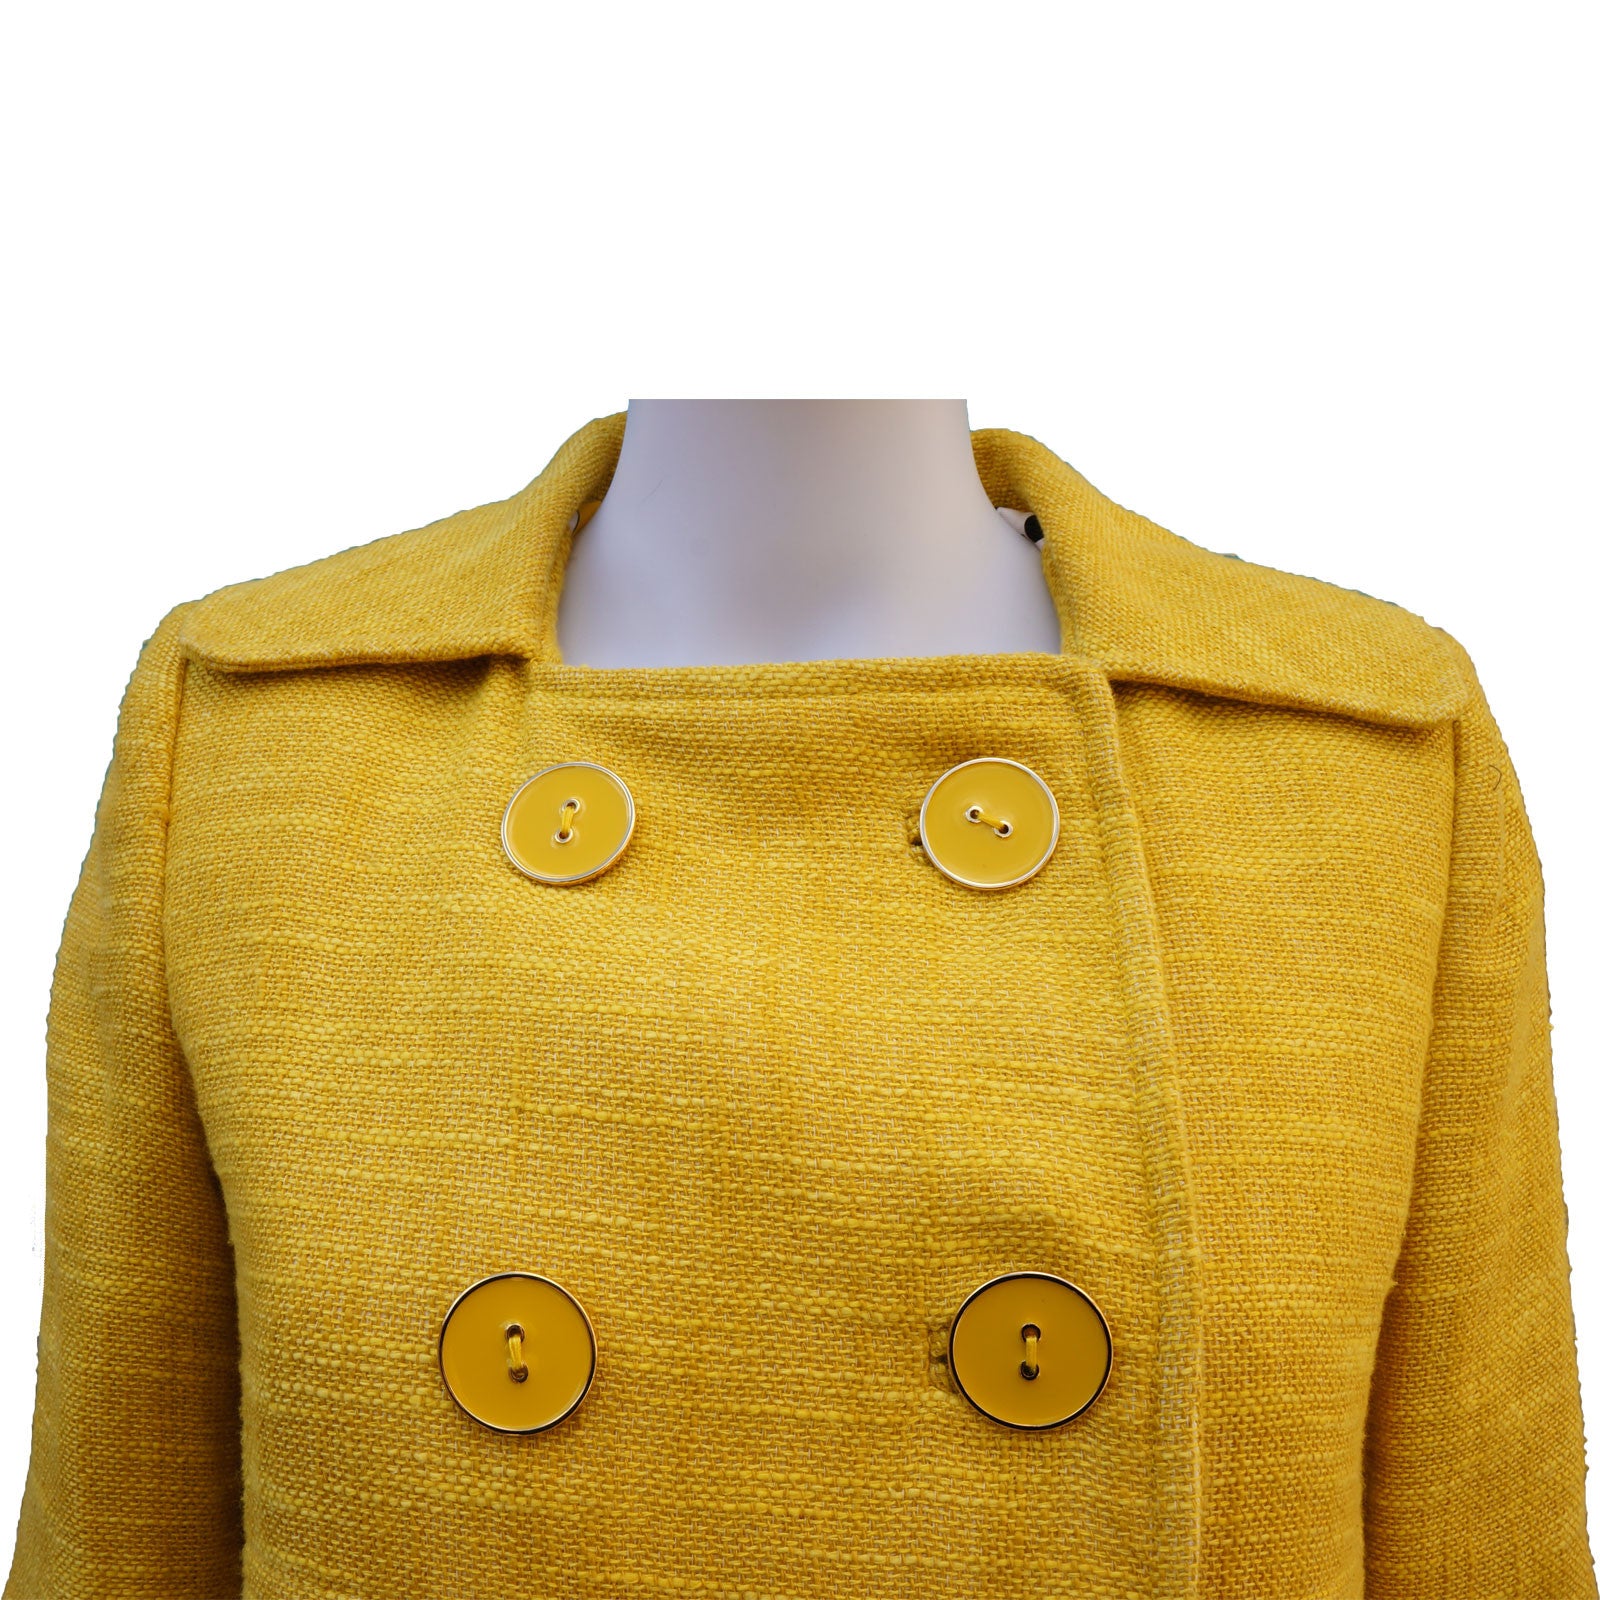 MILLY YELLOW TWEED CROPPED JACKET NEW WITH TAGS - leefluxury.com